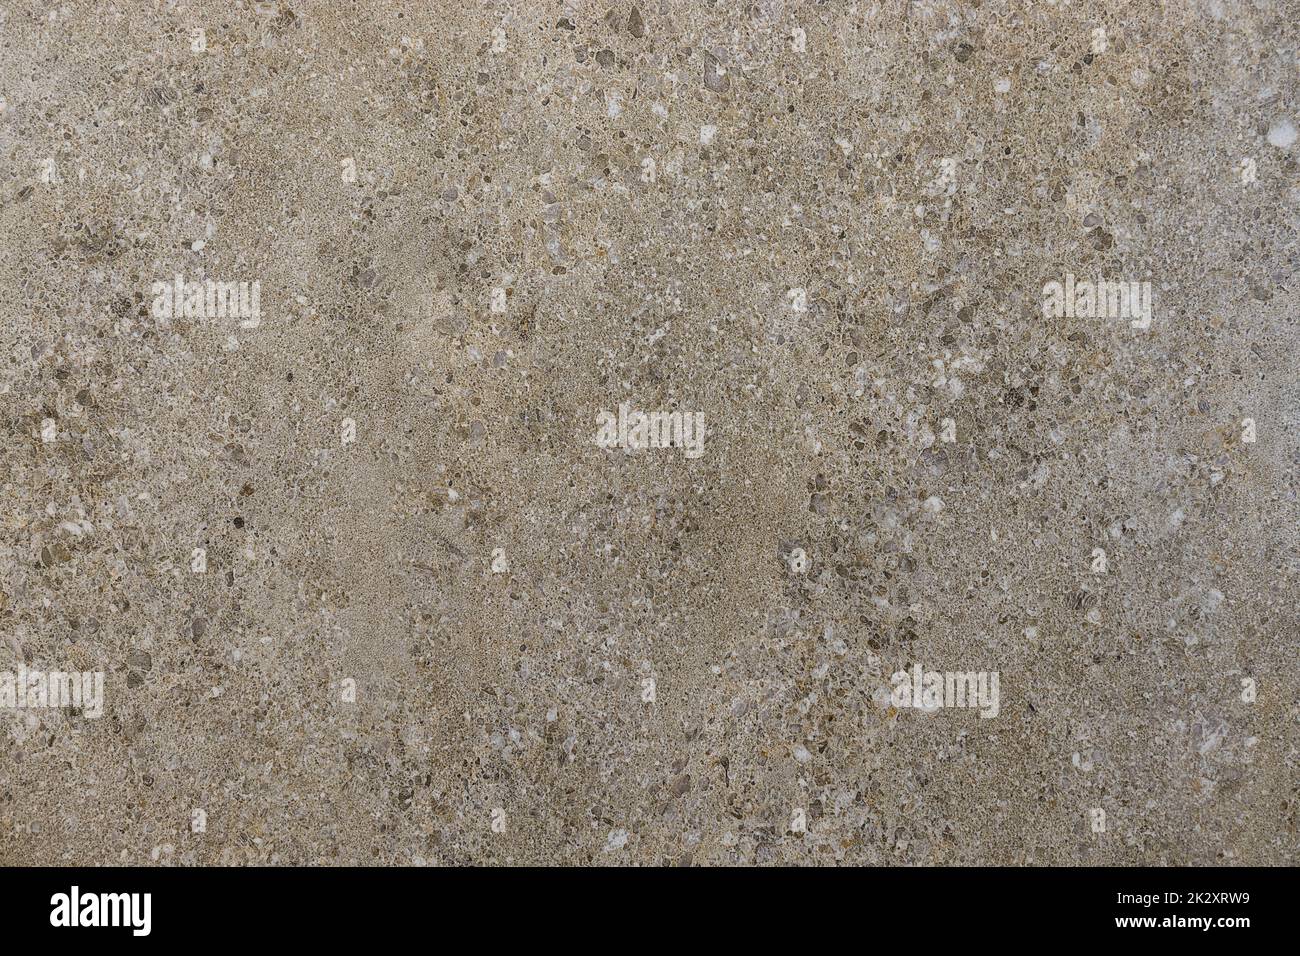 Marble stone tile texture and surface background Stock Photo